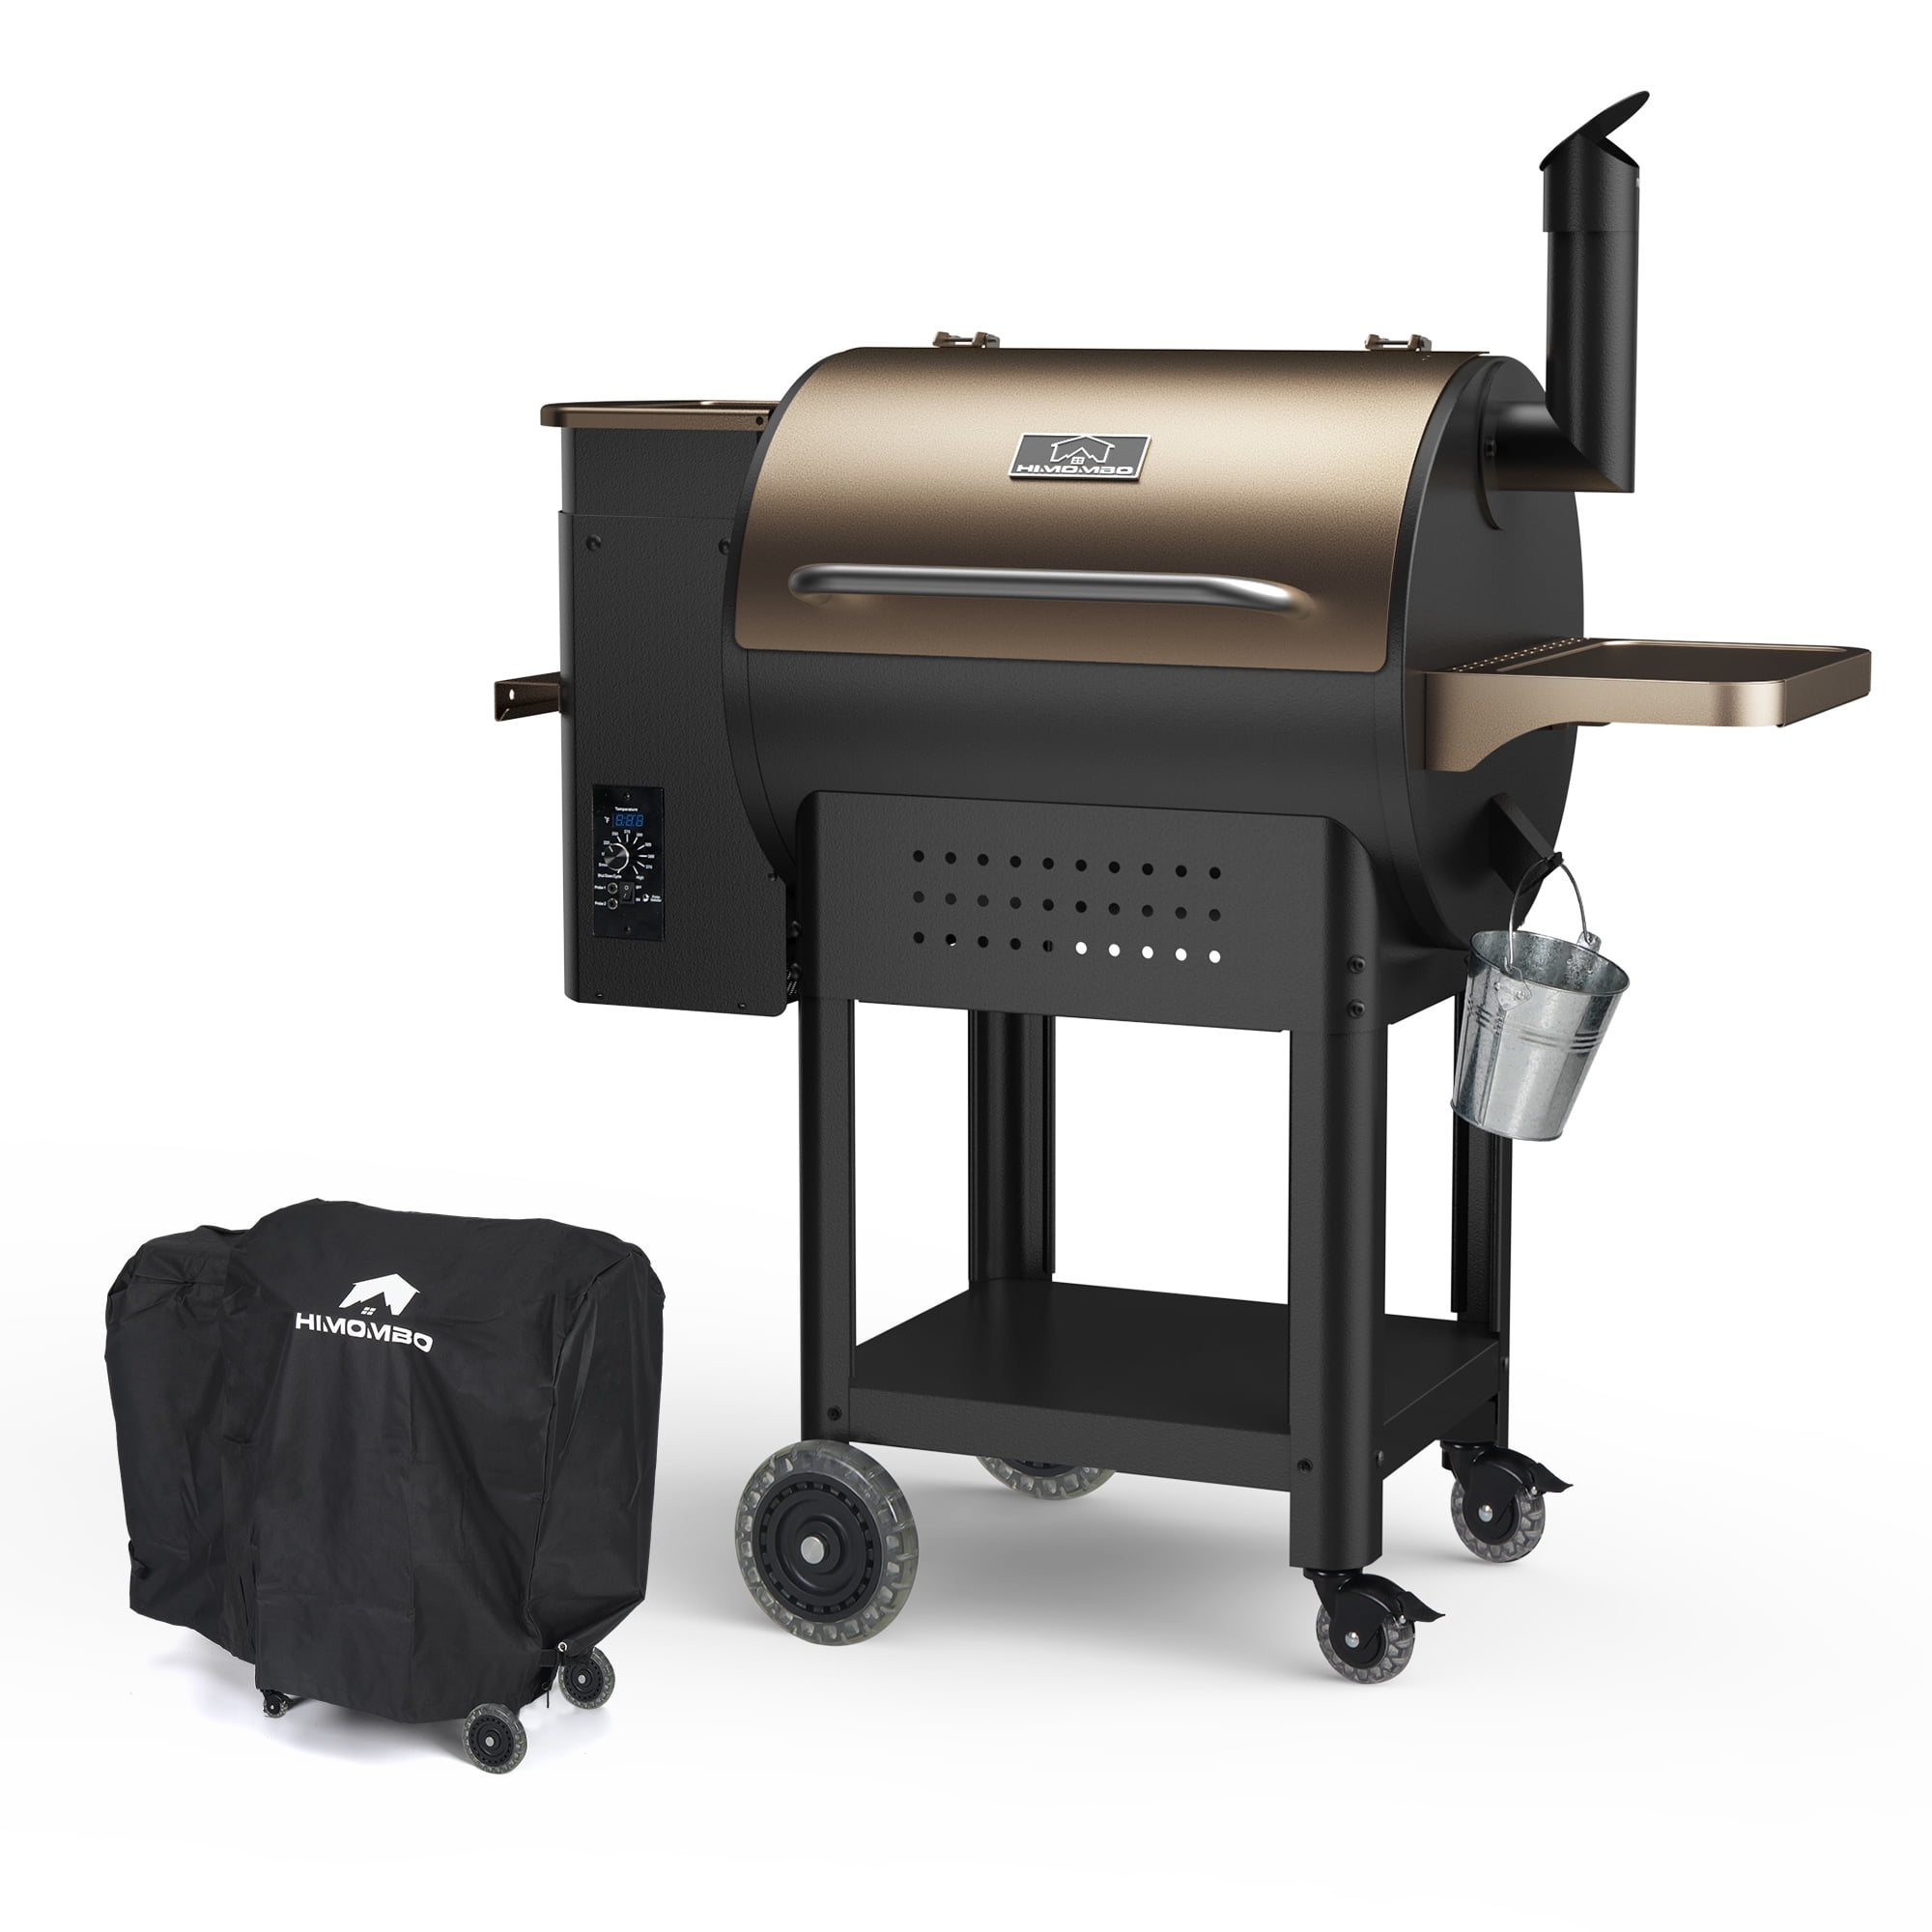 HiMombo 570 SQ. in. 8 1 Wood Pellet Grill and Smokers with 600D Cover, BBQ Grill Pellets, Auto Temperature -